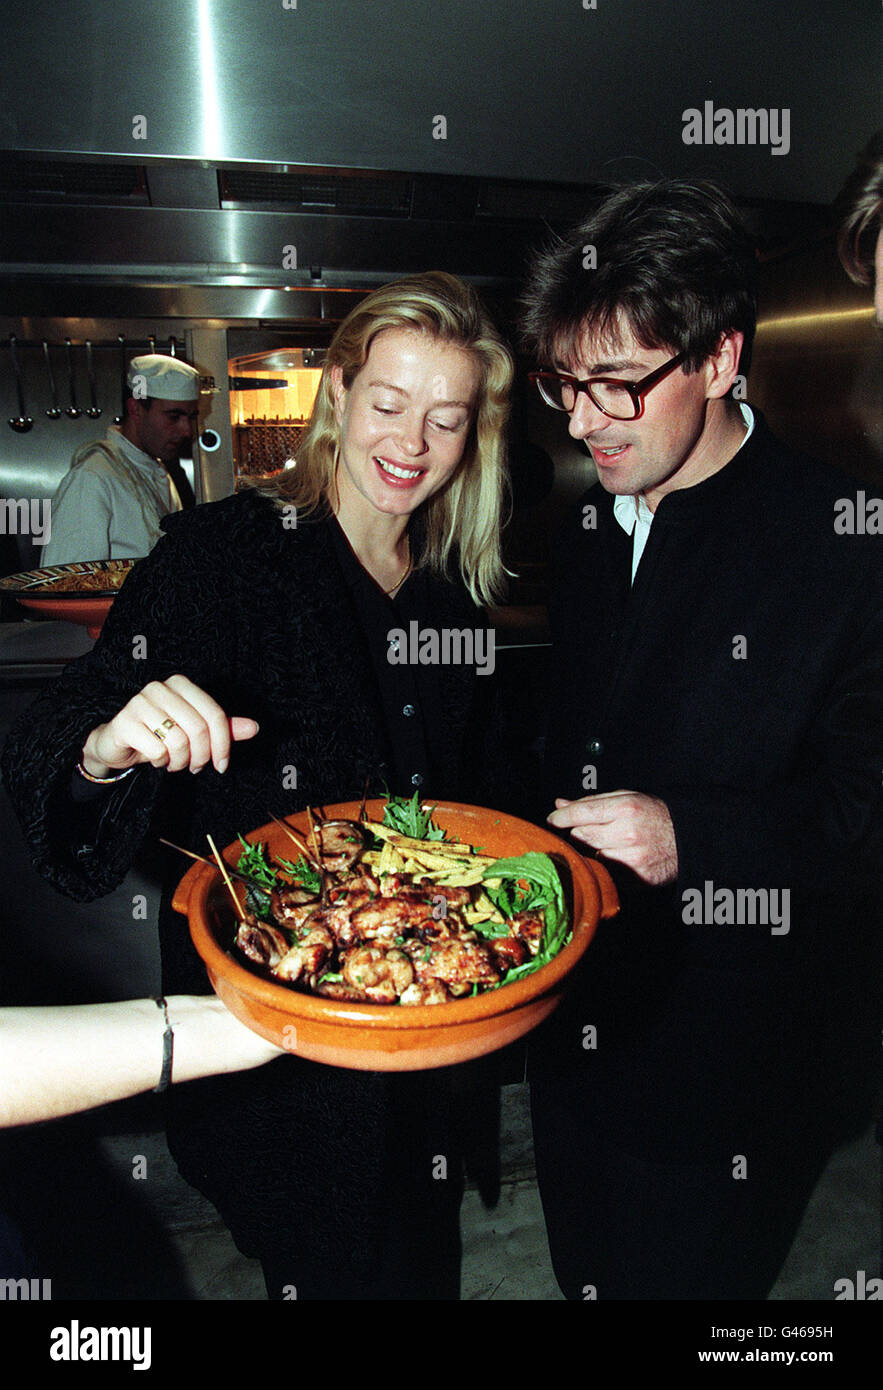 LONDON : 31/10/96 : LADY HELEN TAYLOR AND HER HUSBAND TIM SAMPLE THE FOOD ON OFFER AT THE LAUNCH PARTY OF NEW RESTAURANT, THE POLYGON BAR AND GRILL, IN CLAPHAM, SOUTH LONDON. PA NEWS PHOTO. Stock Photo